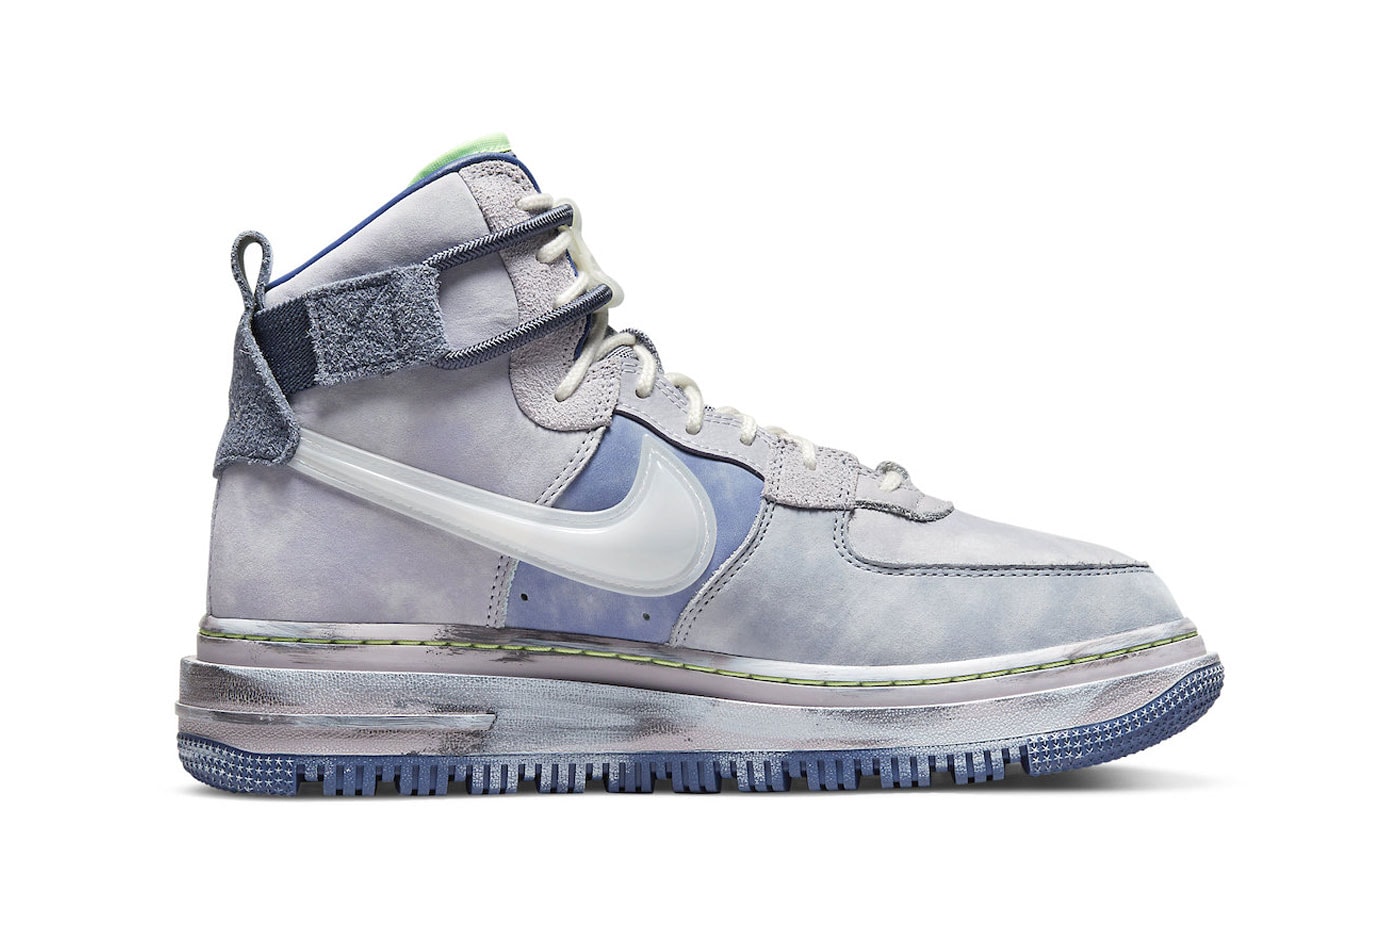 Nike Air Force 1 High Utility 2.0 in "Deep Freeze" Release Date footwear sneakers suede leather icy blue grey white